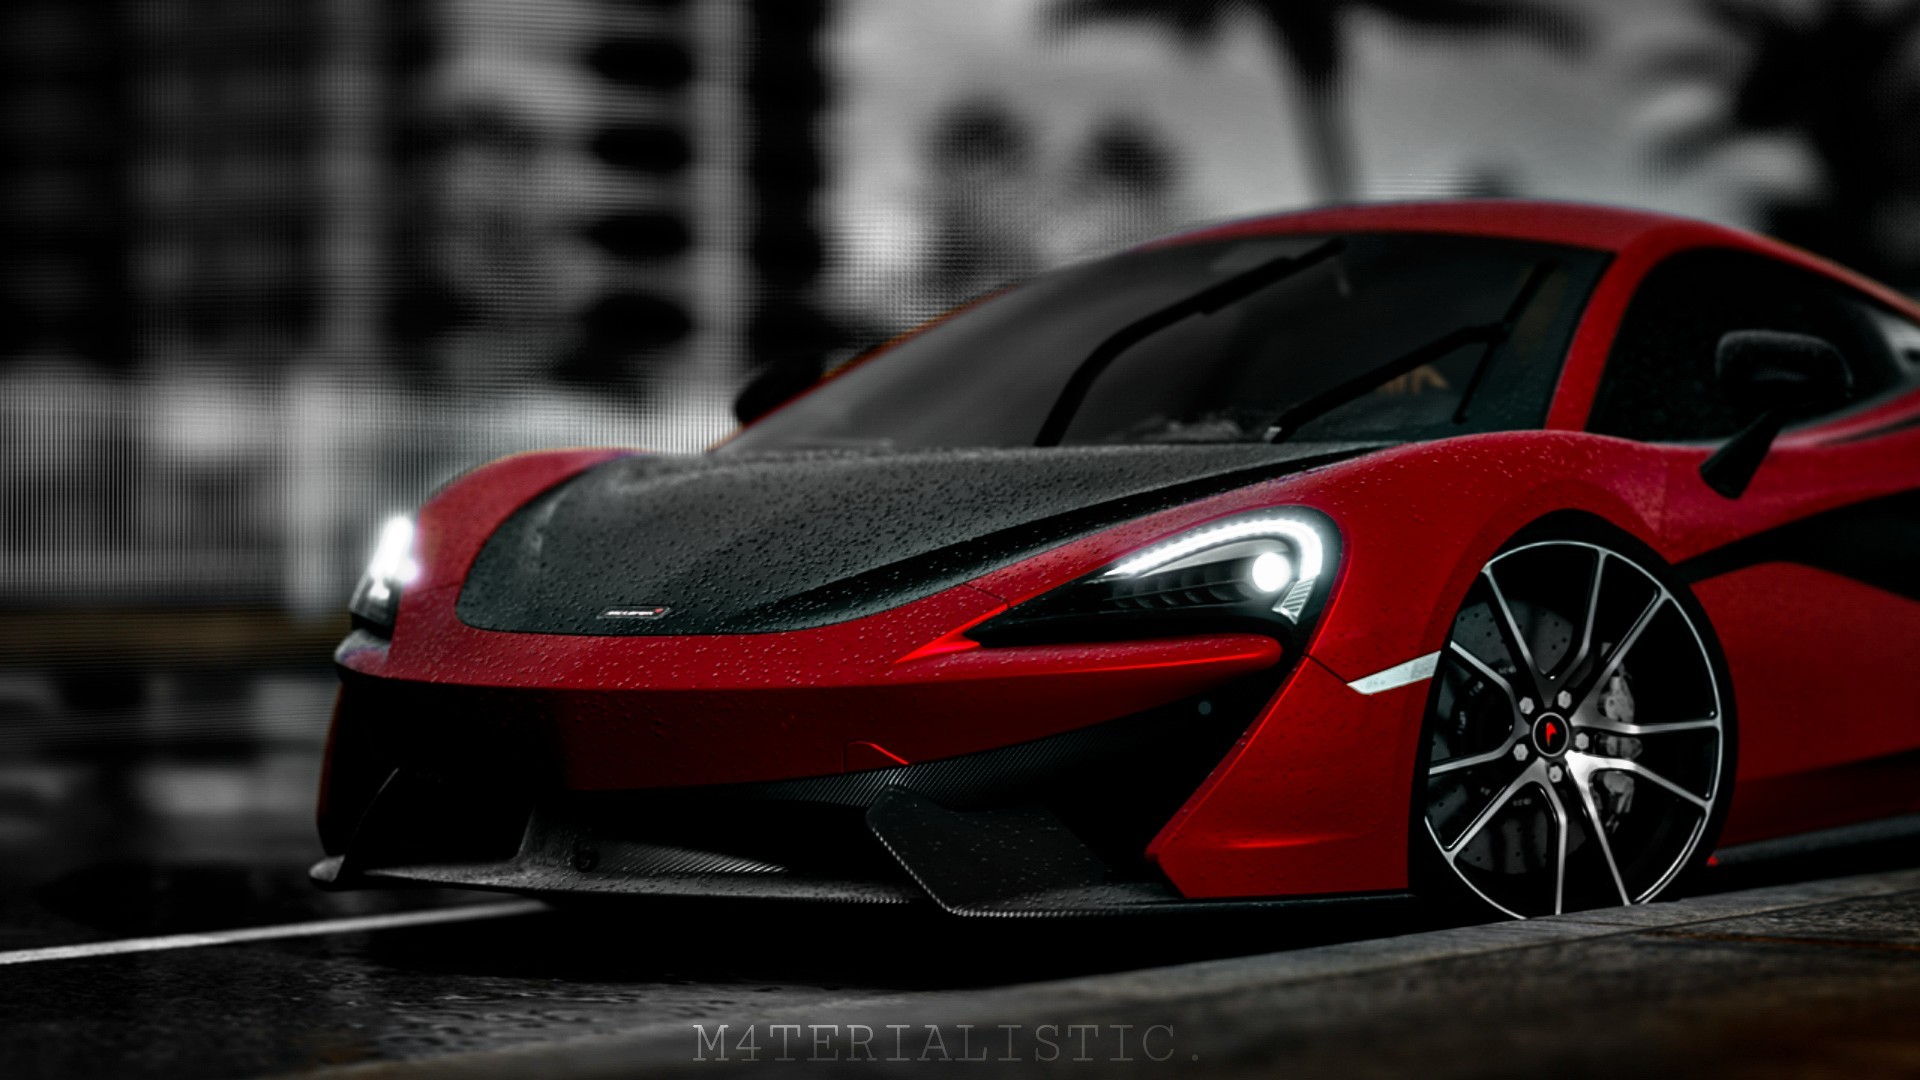 M4terialistic 570s Realism Fh3 Images, Photos, Reviews